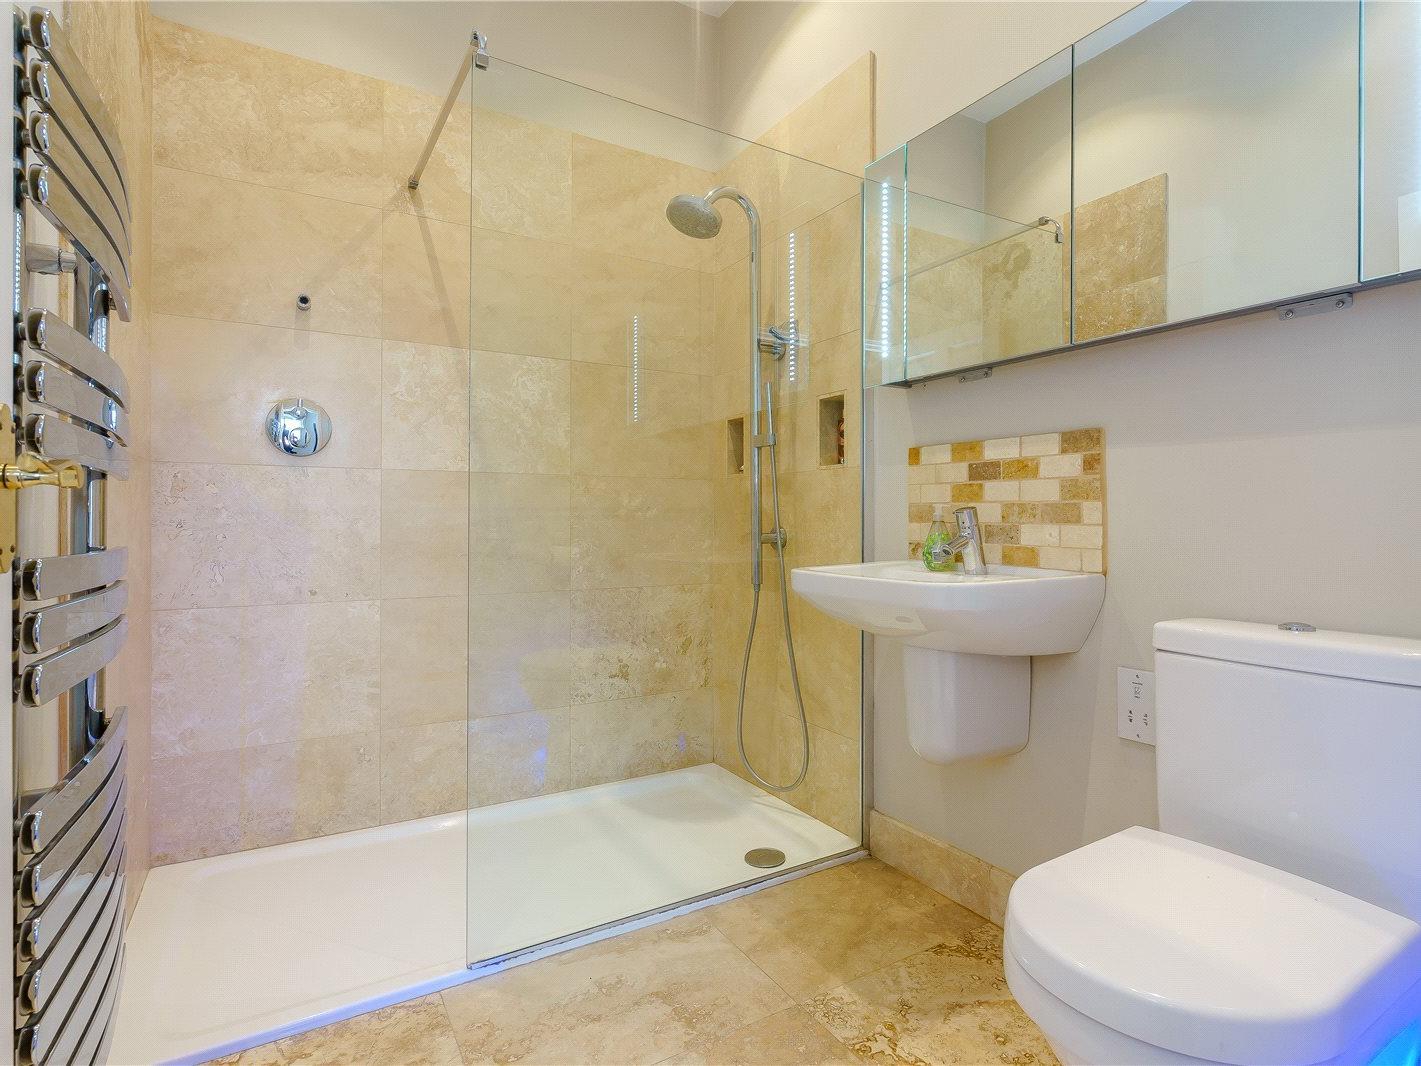 The bathrooms feature huge showers and heated towel racks.